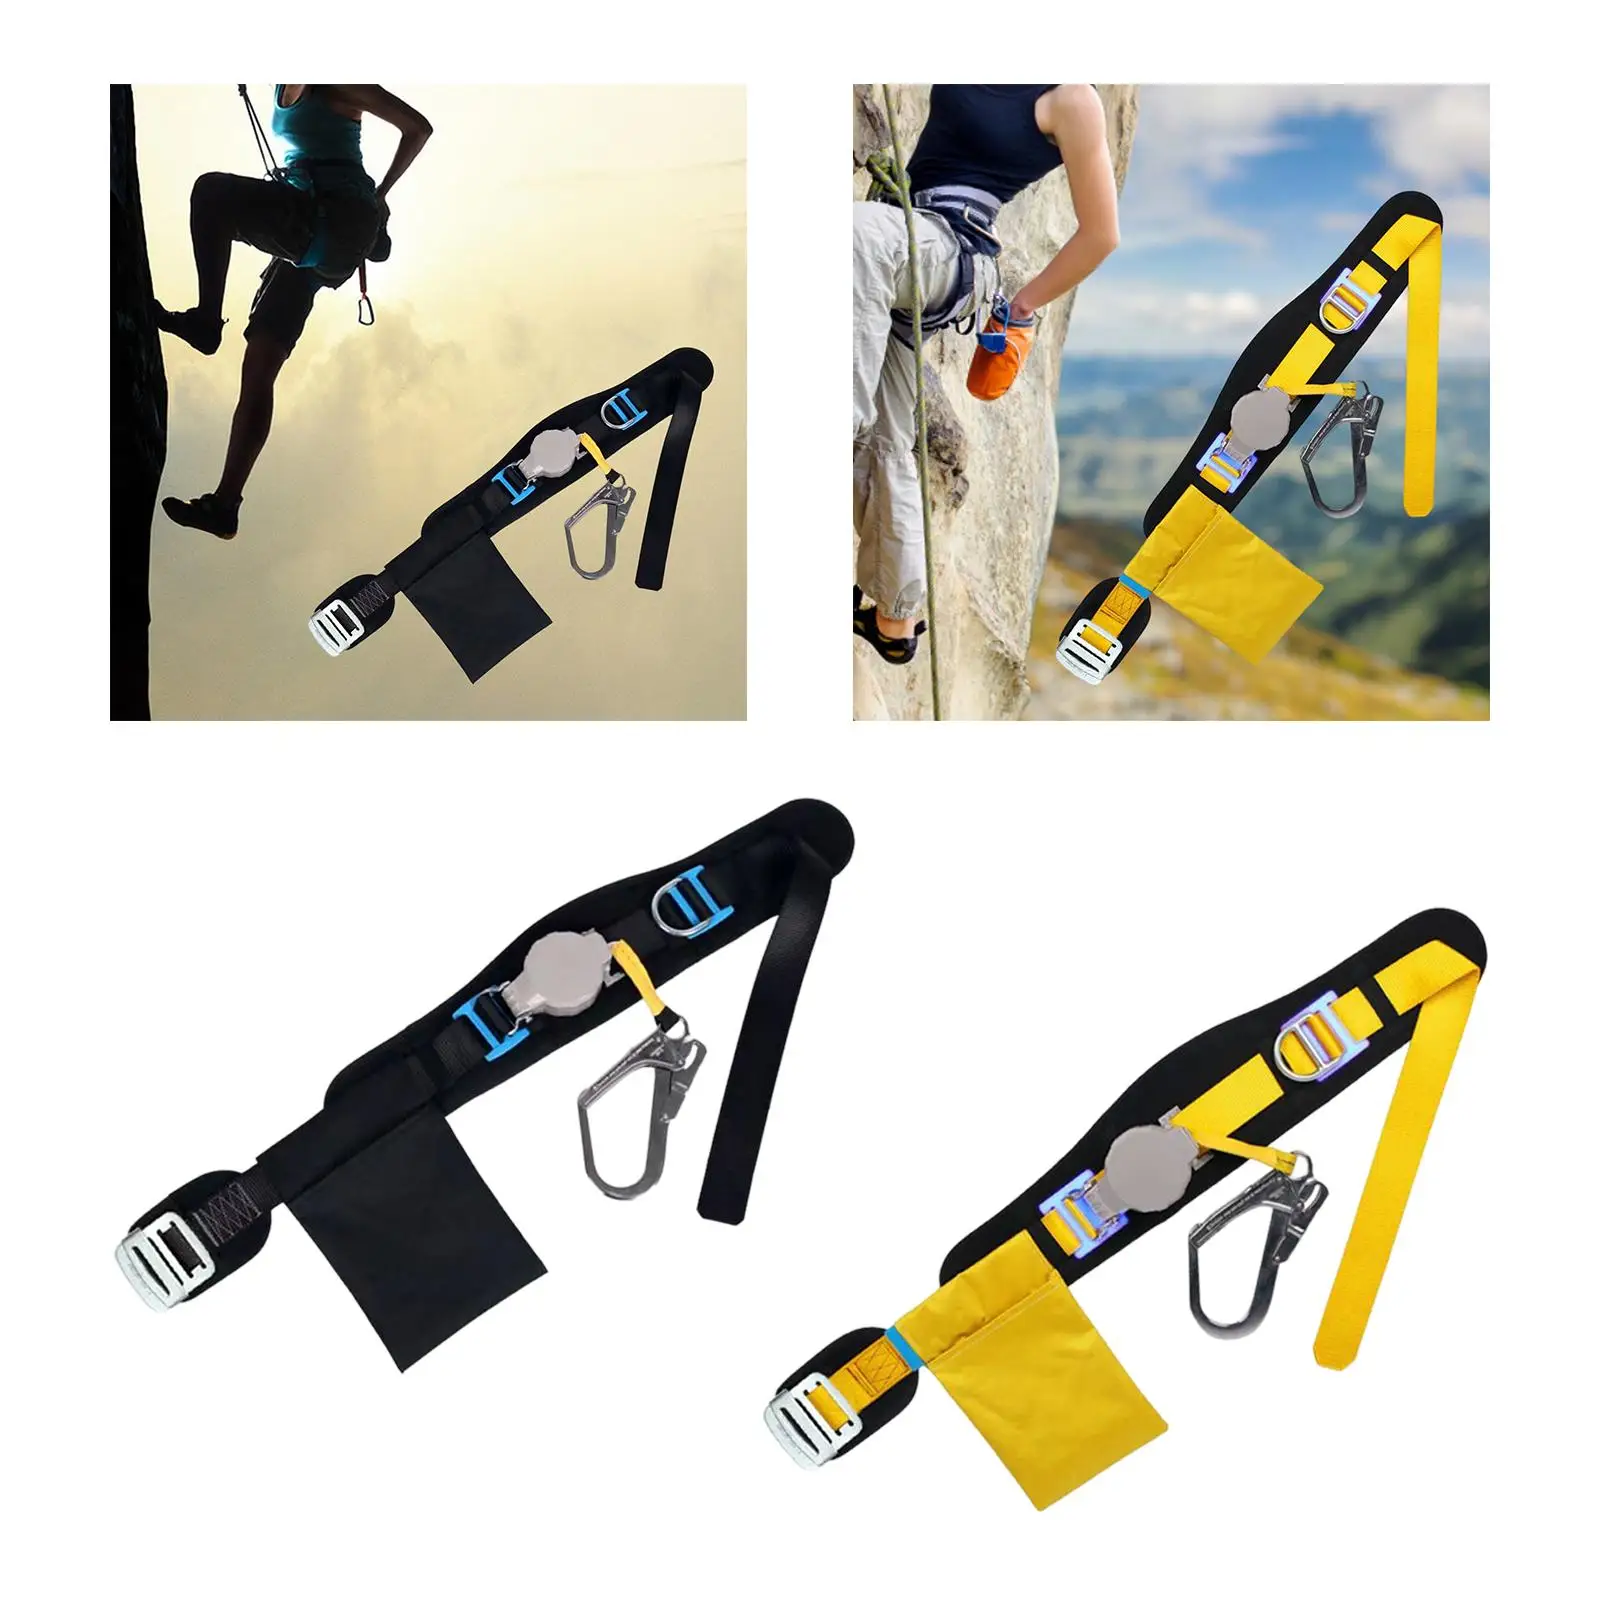 Single Seat Belt Fall Prevention Heavy Duty Equipment Supplies Protective Safety Harness Lanyard for Outdoor Activities Walking